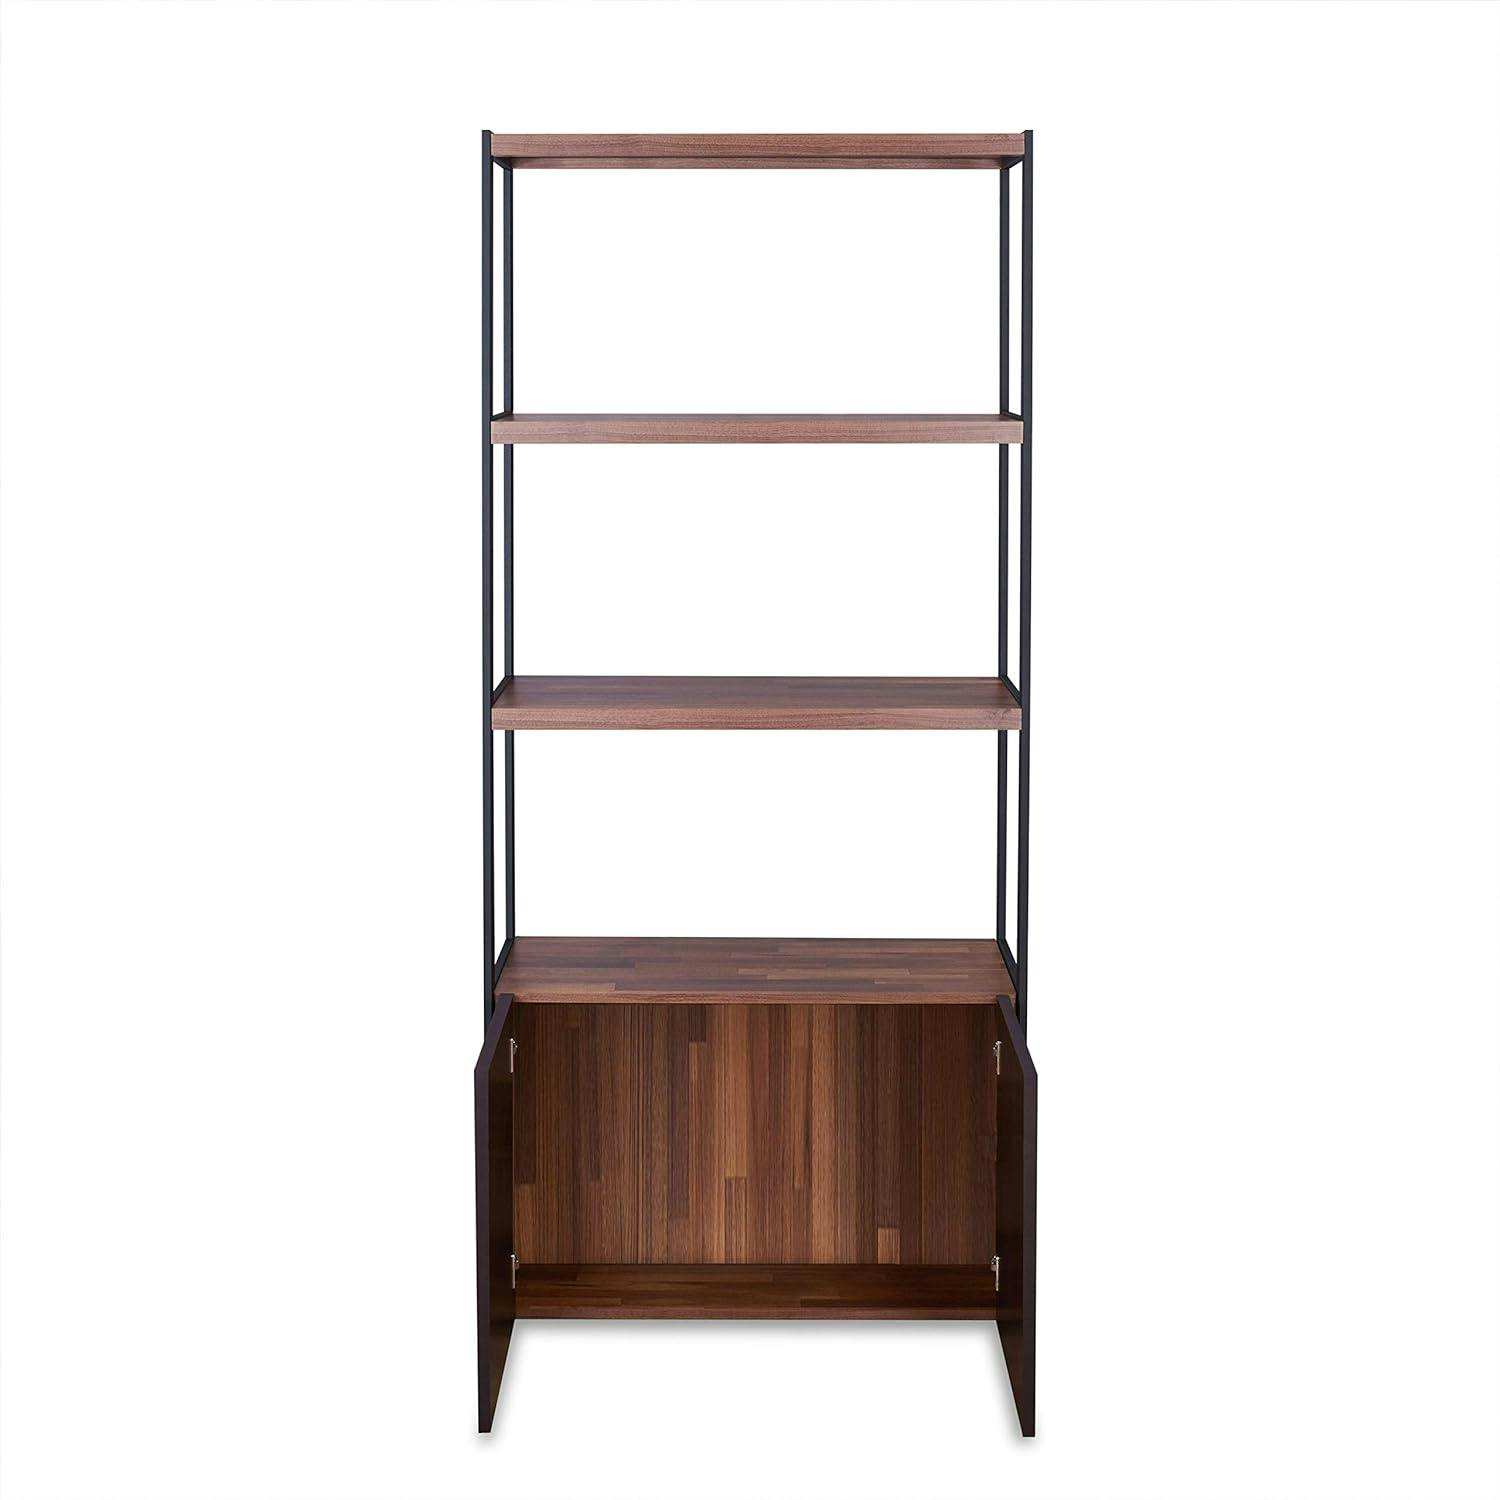 Modern Black Wood Bookcase with Faux Leather Doors, 32"x70"